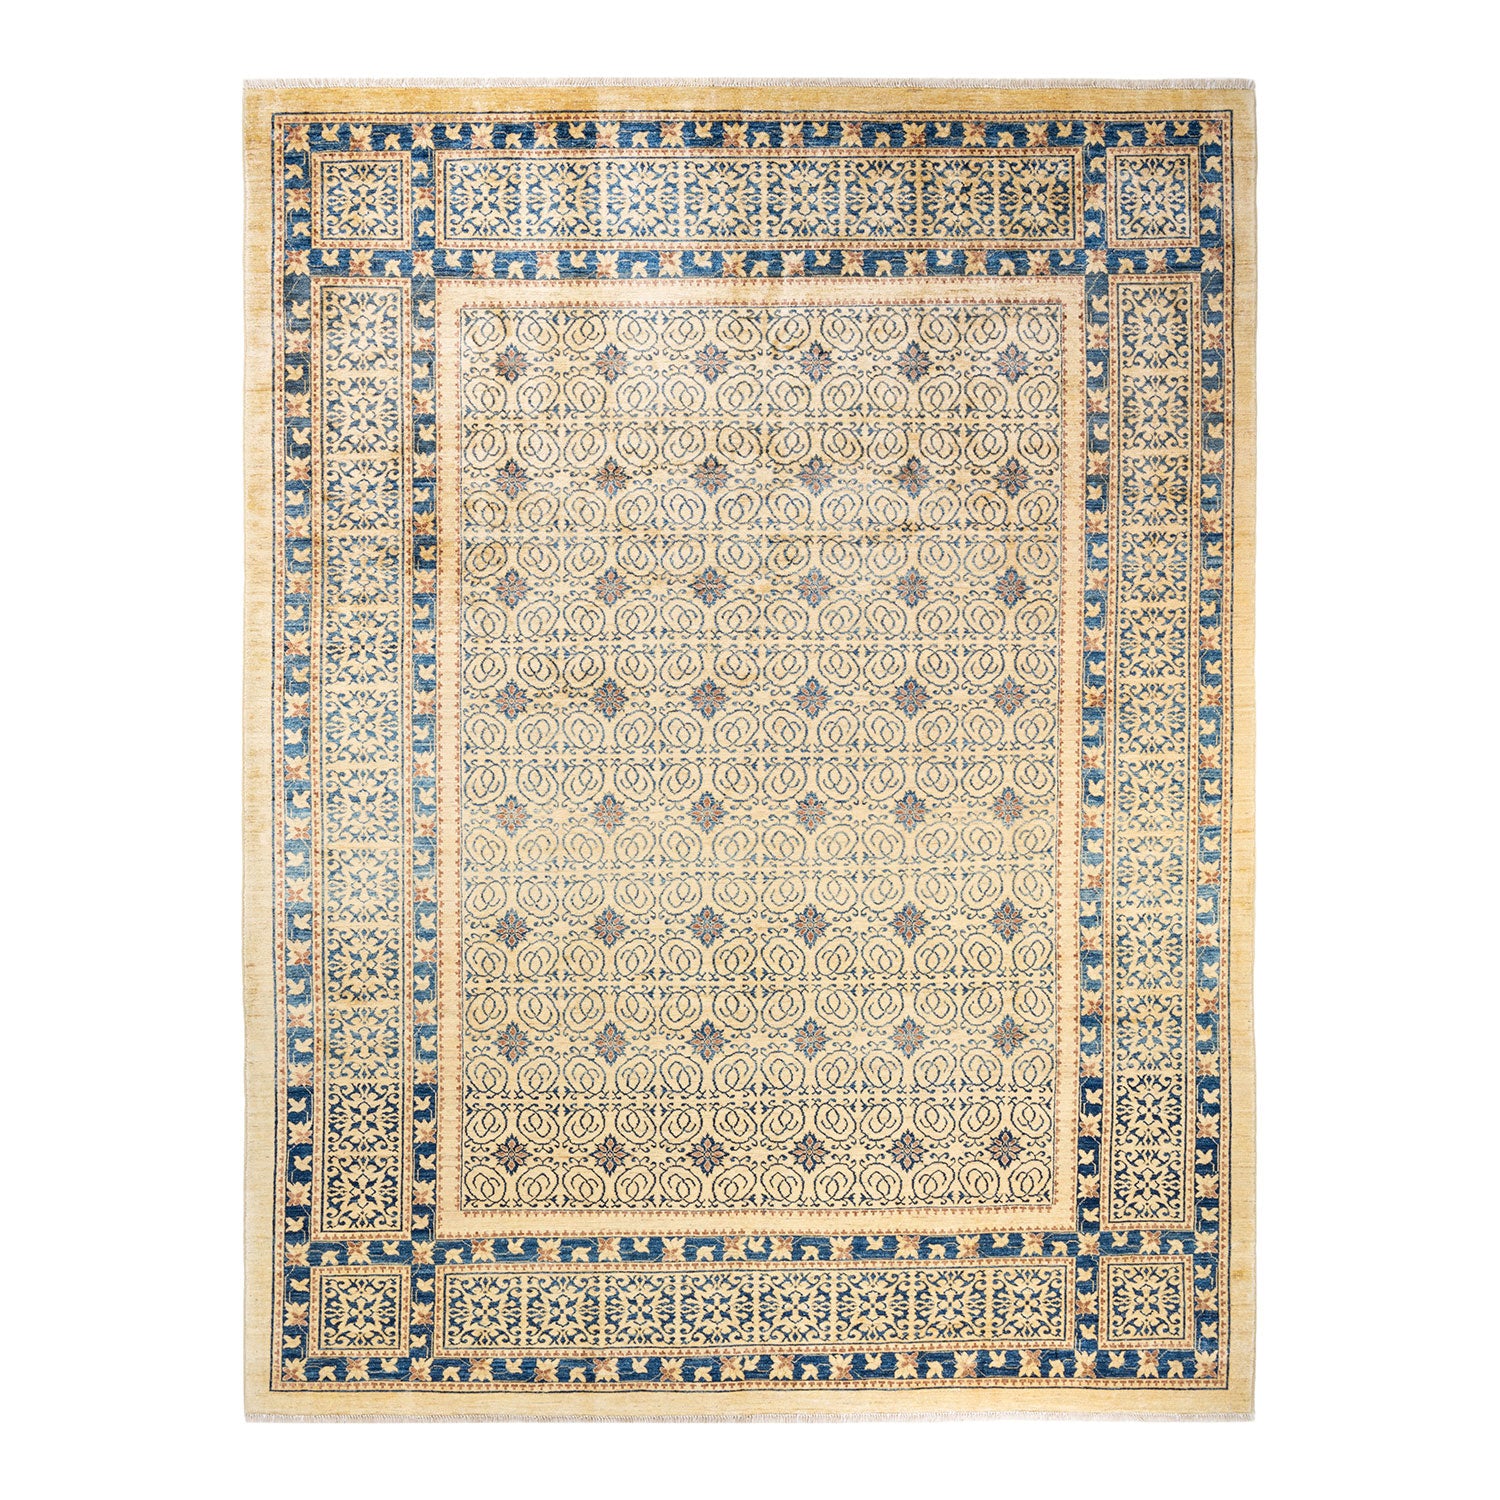 Symmetrical rectangular area rug with intricate floral and geometric patterns.